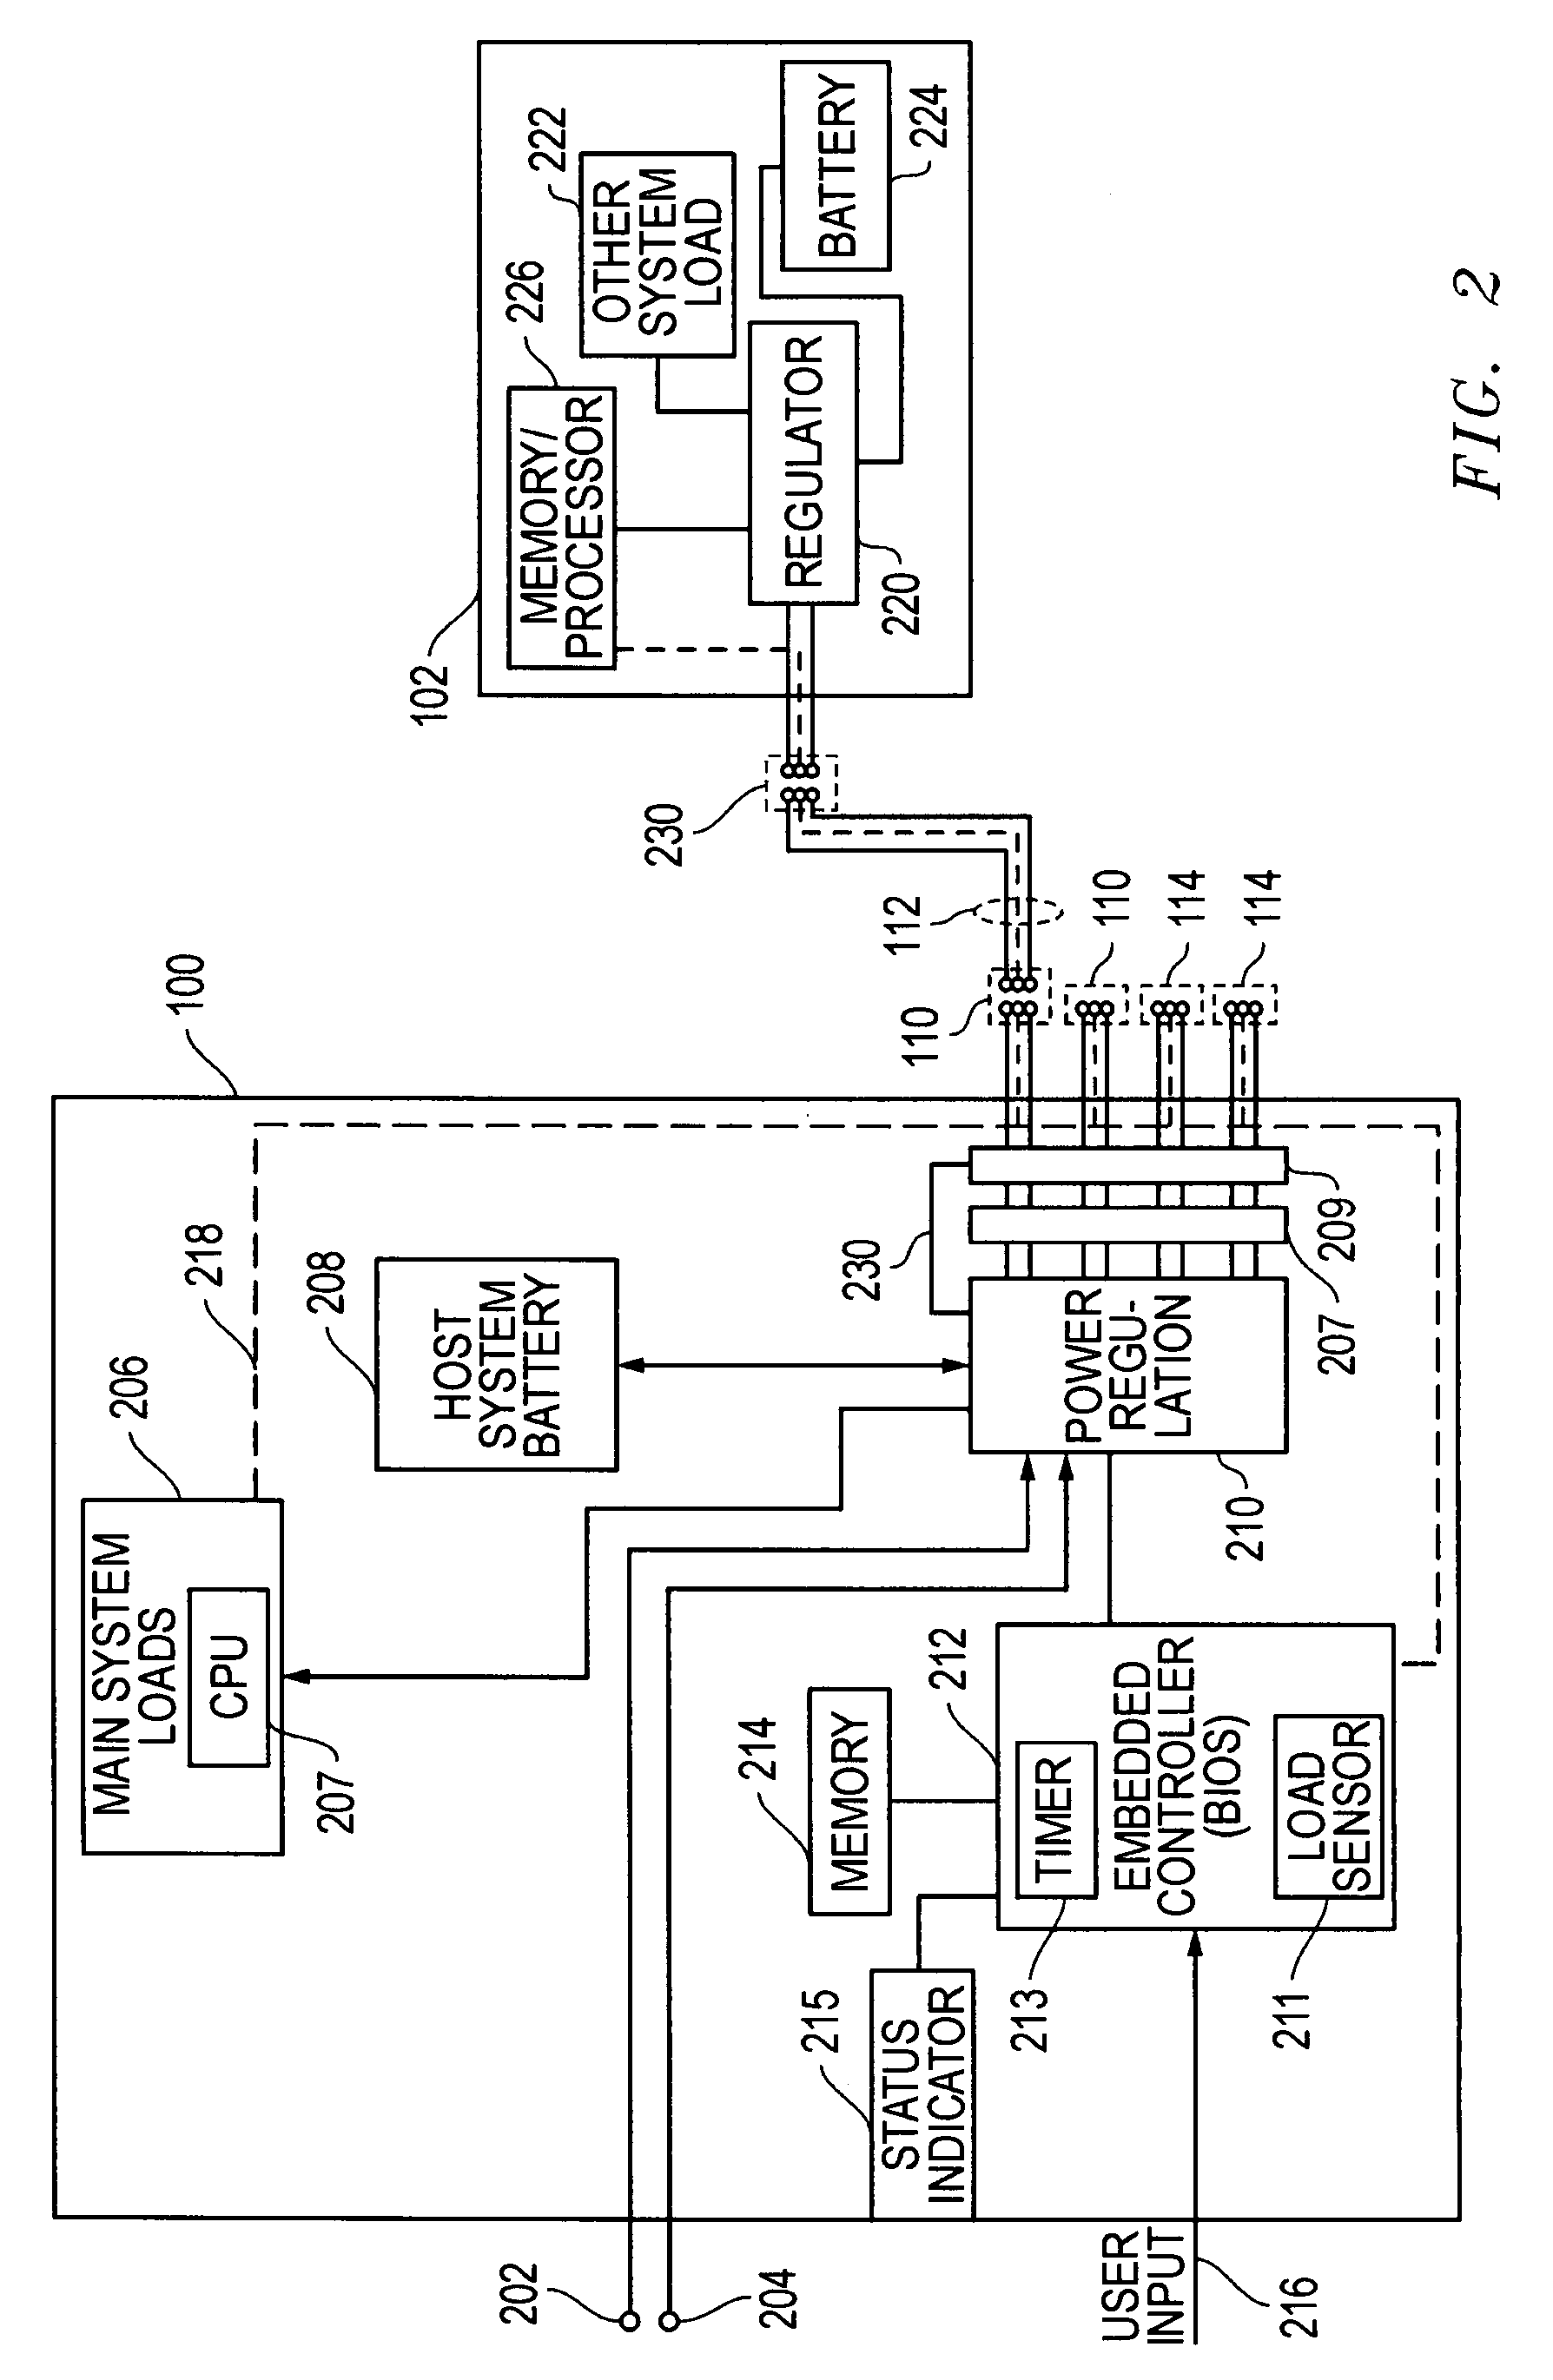 Systems and methods for power management